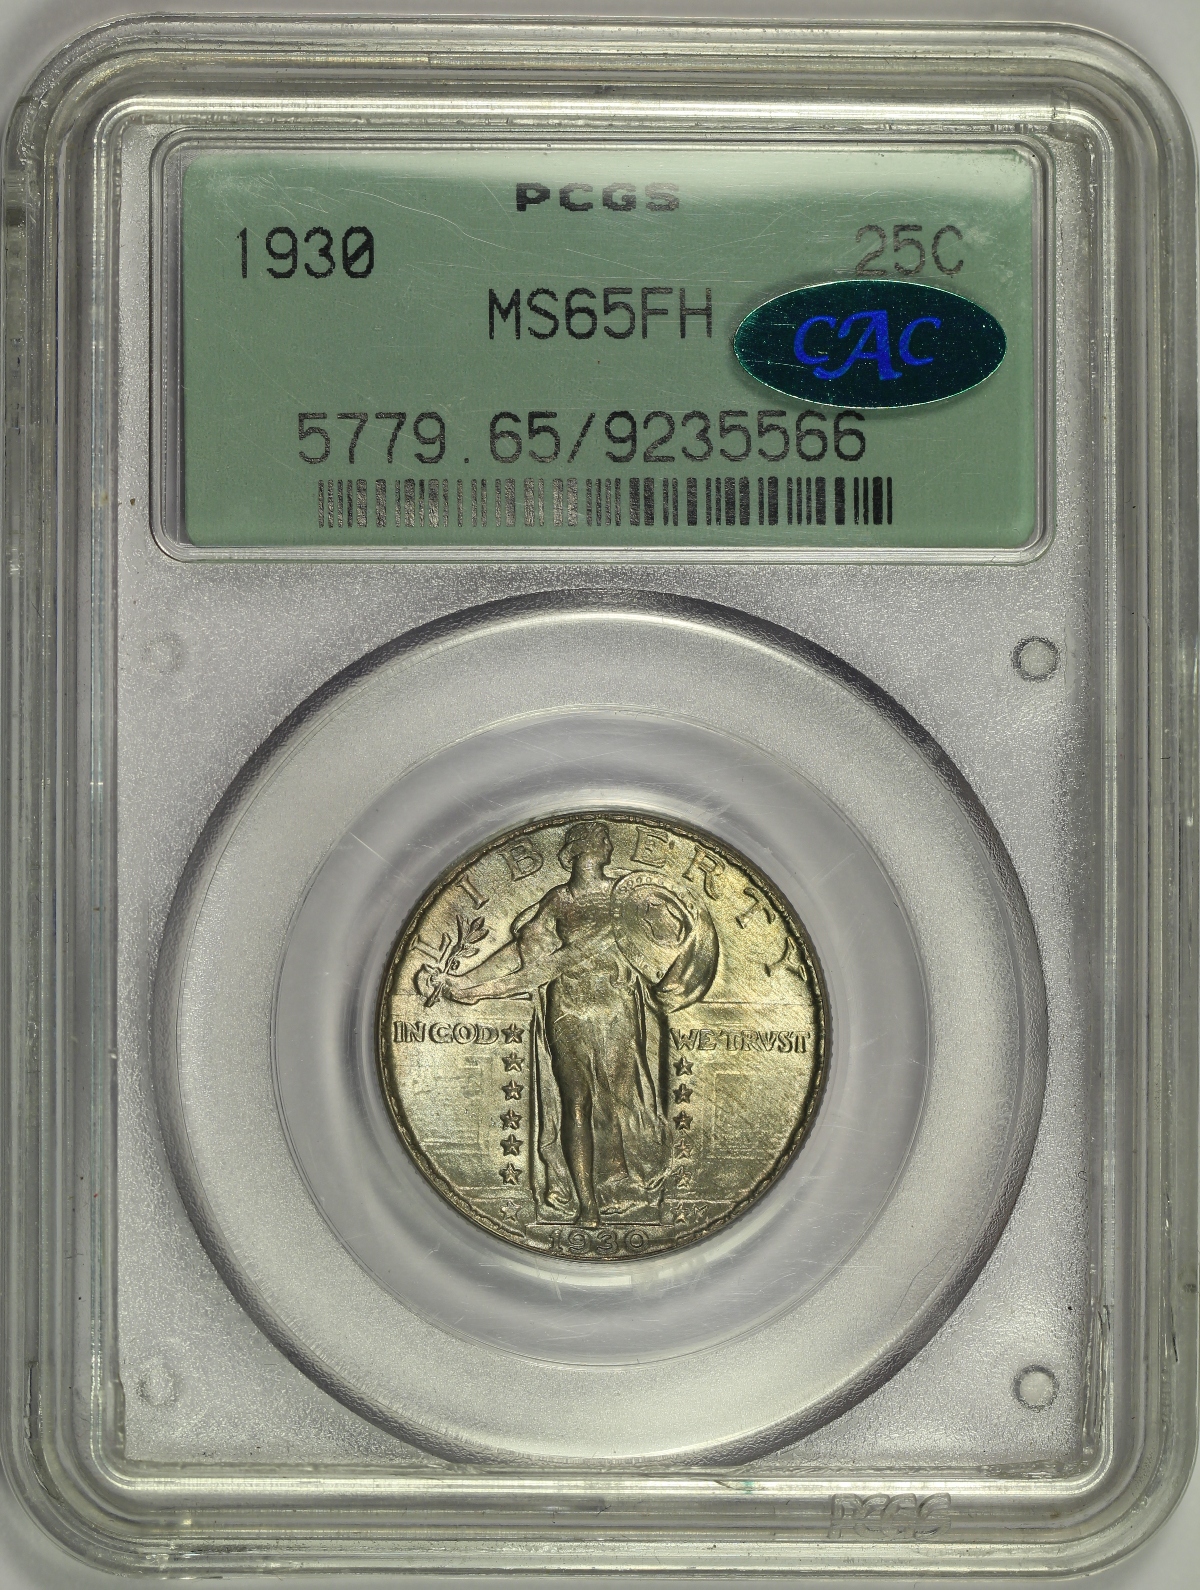 Michael Kittle Rare Coins - 1930 Standing Liberty Quarter PCGS MS65FH CAC